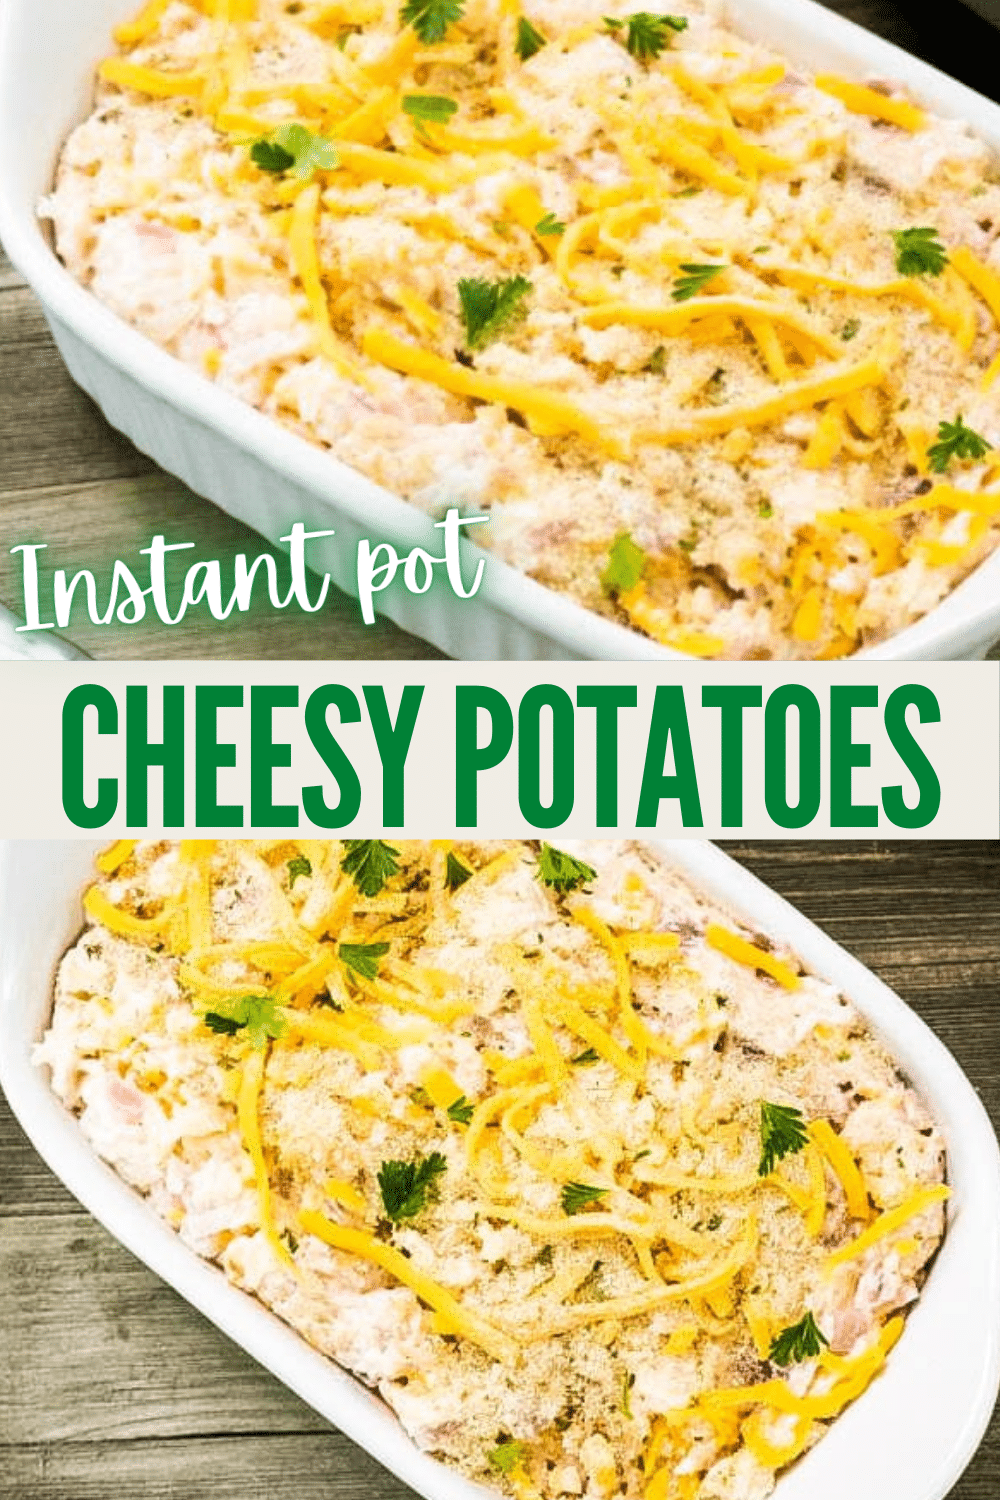 These Instant Pot Cheesy Potatoes are a crowd-pleasing side dish. Also known as funeral potatoes, this casserole is a classic comfort food. #instantpot #pressurecooker #sidedish #potatoes #instantpotcheesypotatoes via @wondermomwannab